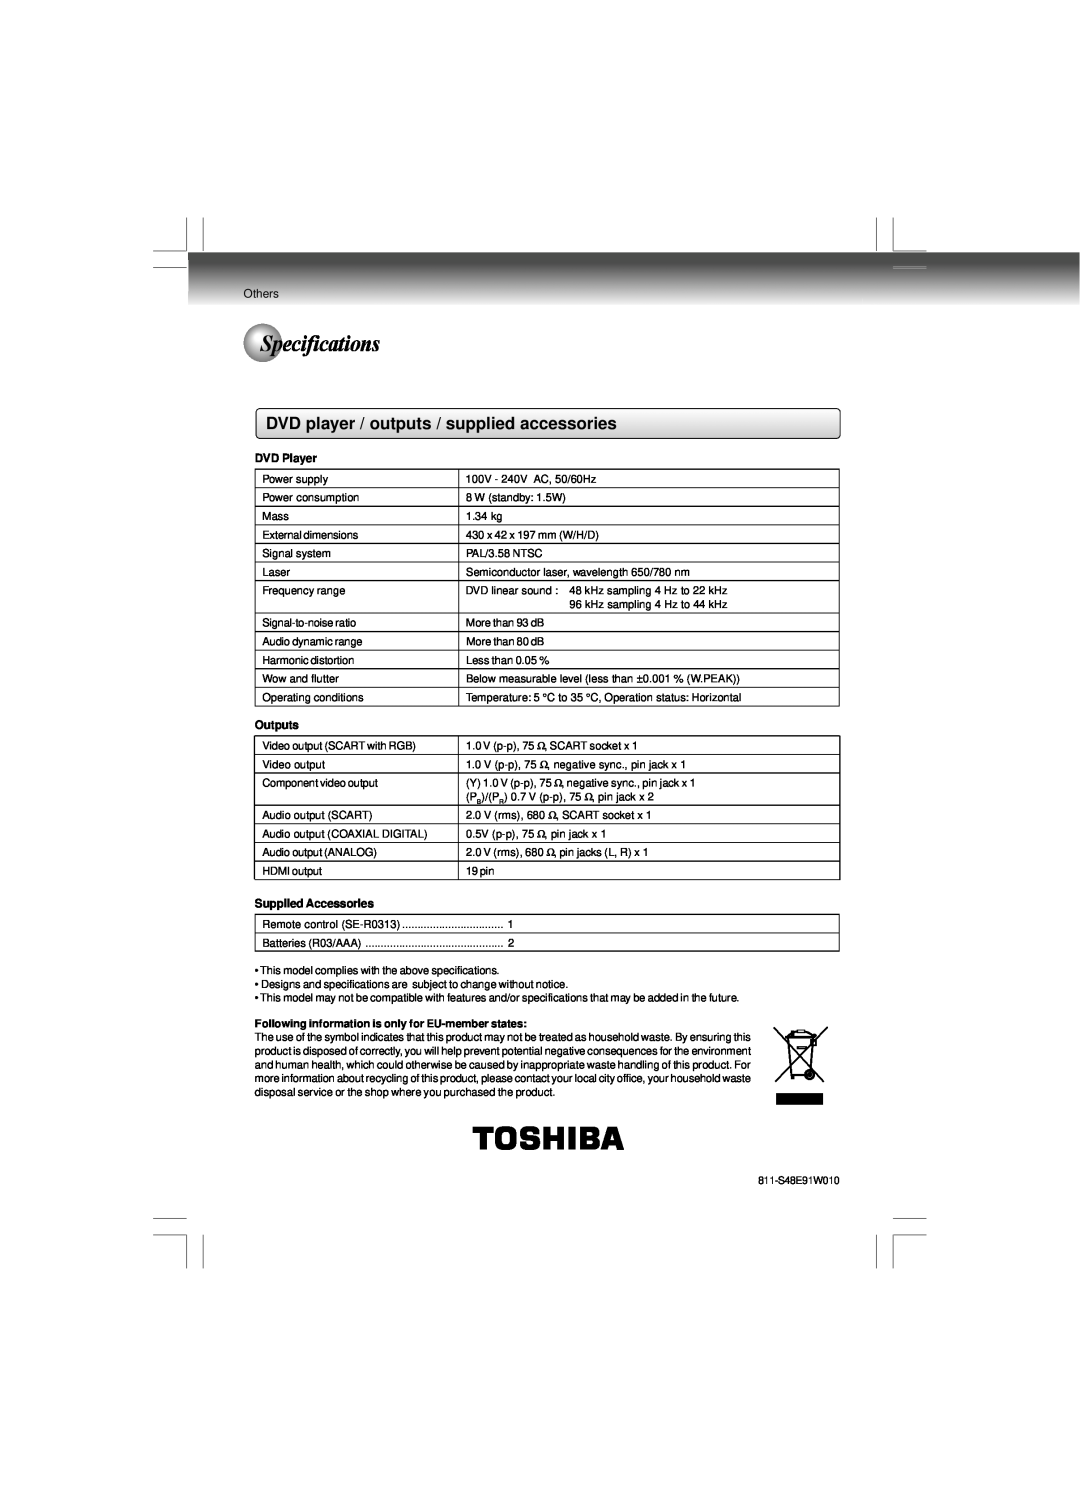 Toshiba SD-480EKE Specifications, DVD player / outputs / supplied accessories, DVD Player, Outputs, Supplied Accessories 